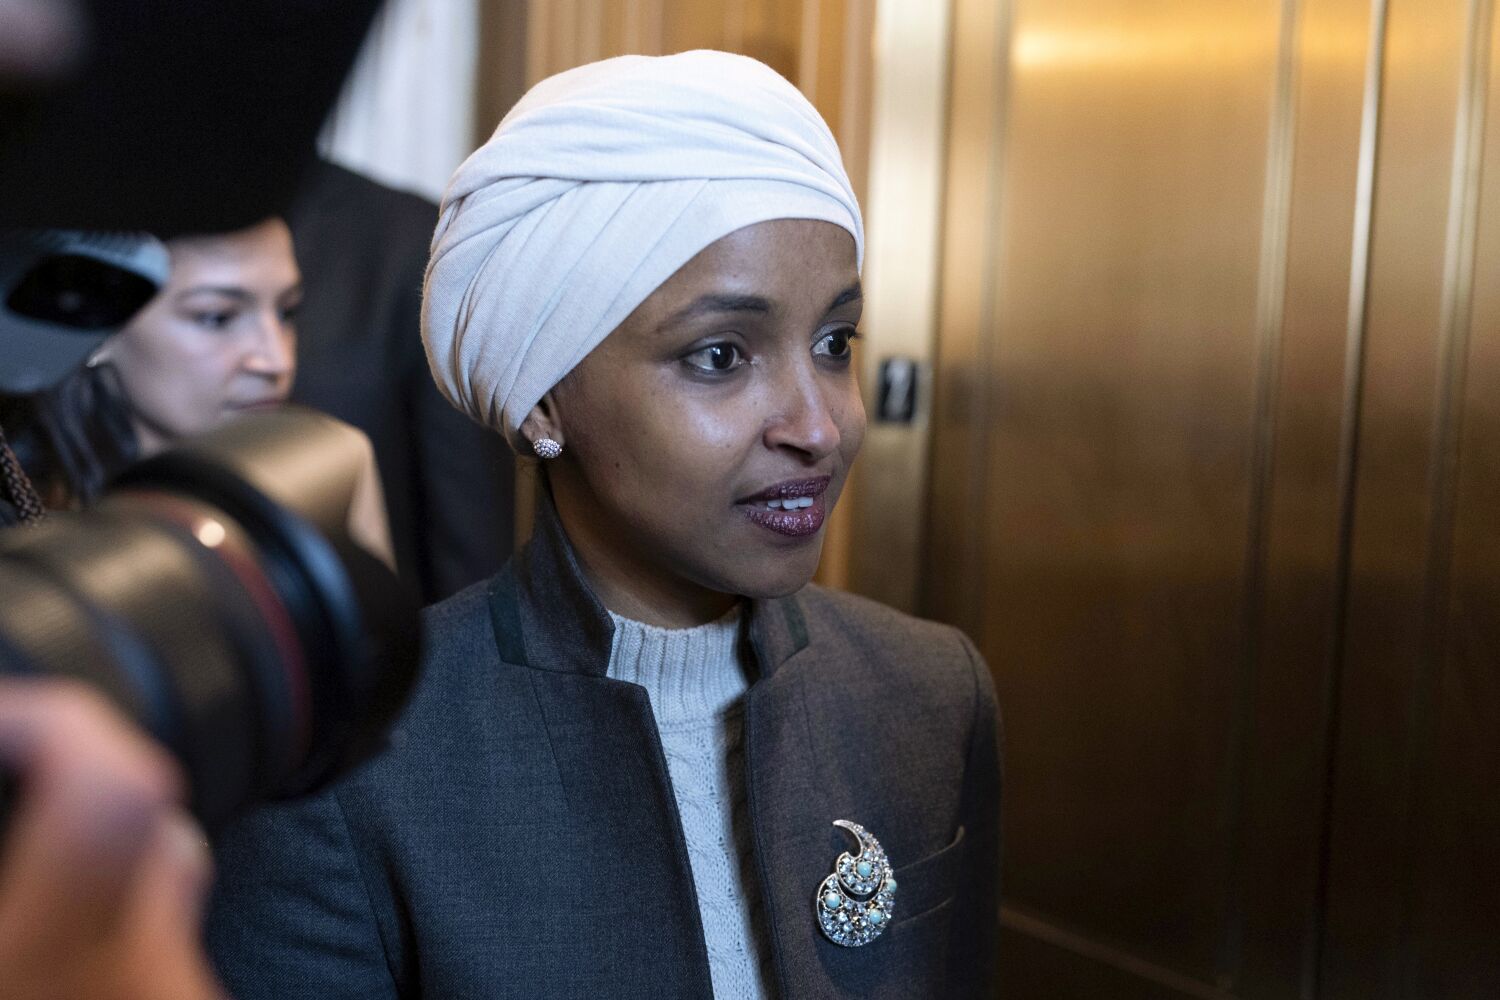 Column: What got Rep. Ilhan Omar kicked off that House committee? Payback and prejudice, not antisemitism 